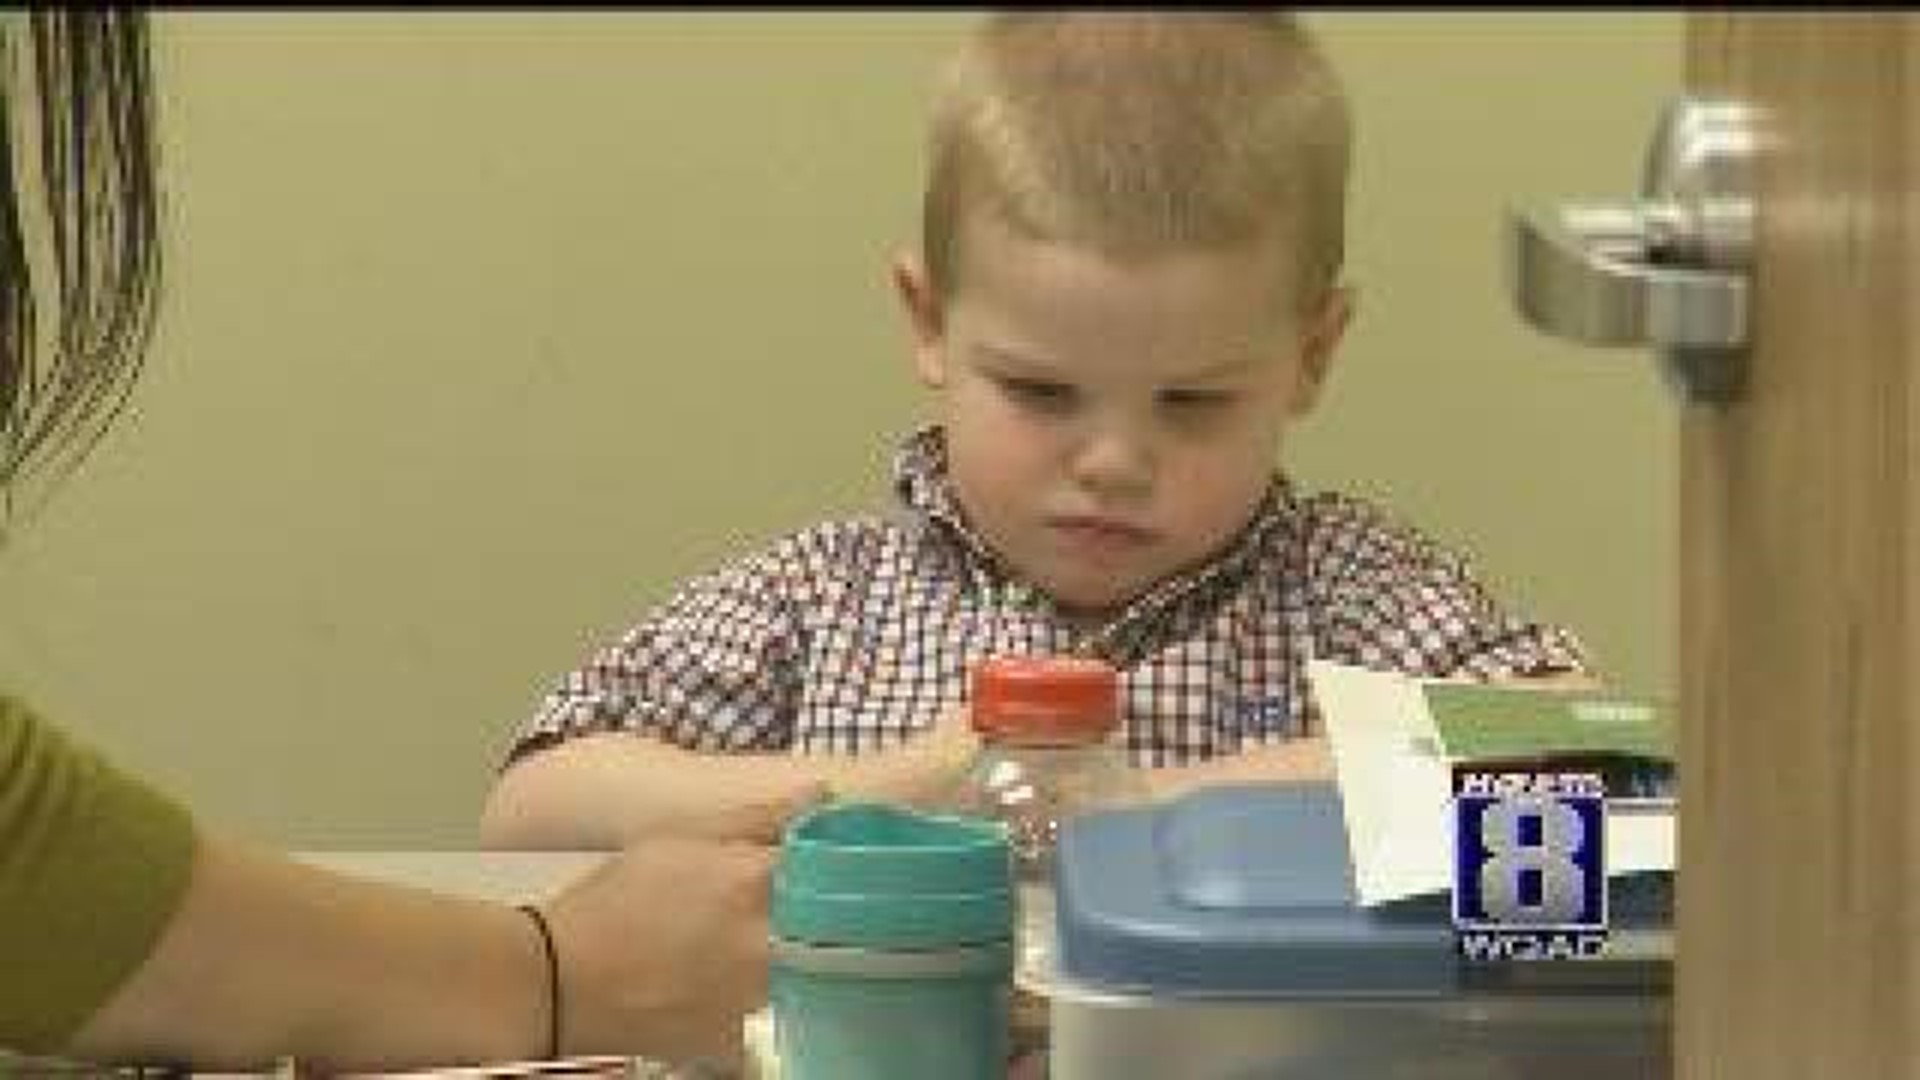 New autism project in Iowa